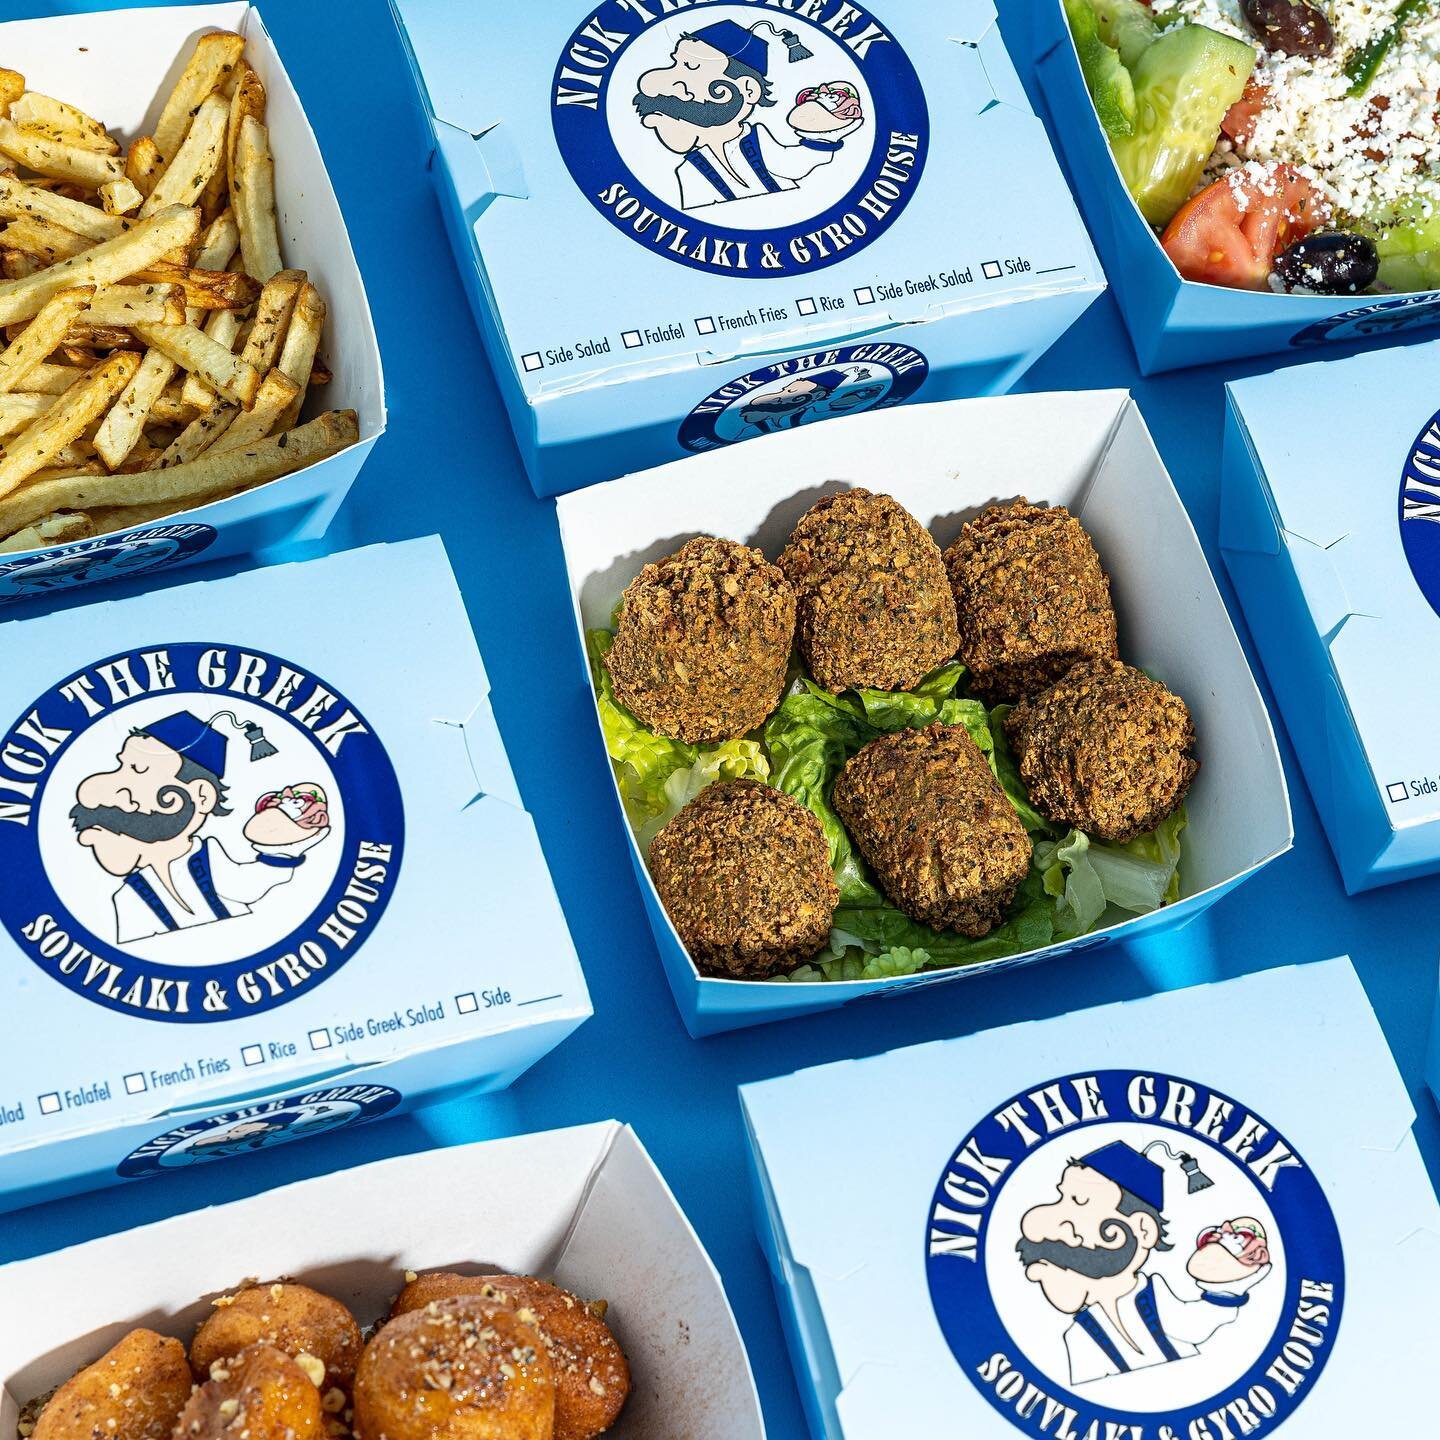 Spend $20 and pick one of our sides on us!
Use code spend20 on our online store or on the app. 🫓🍟🥗

#nickthegreek #sides #greekfood #pita #hummus #salad